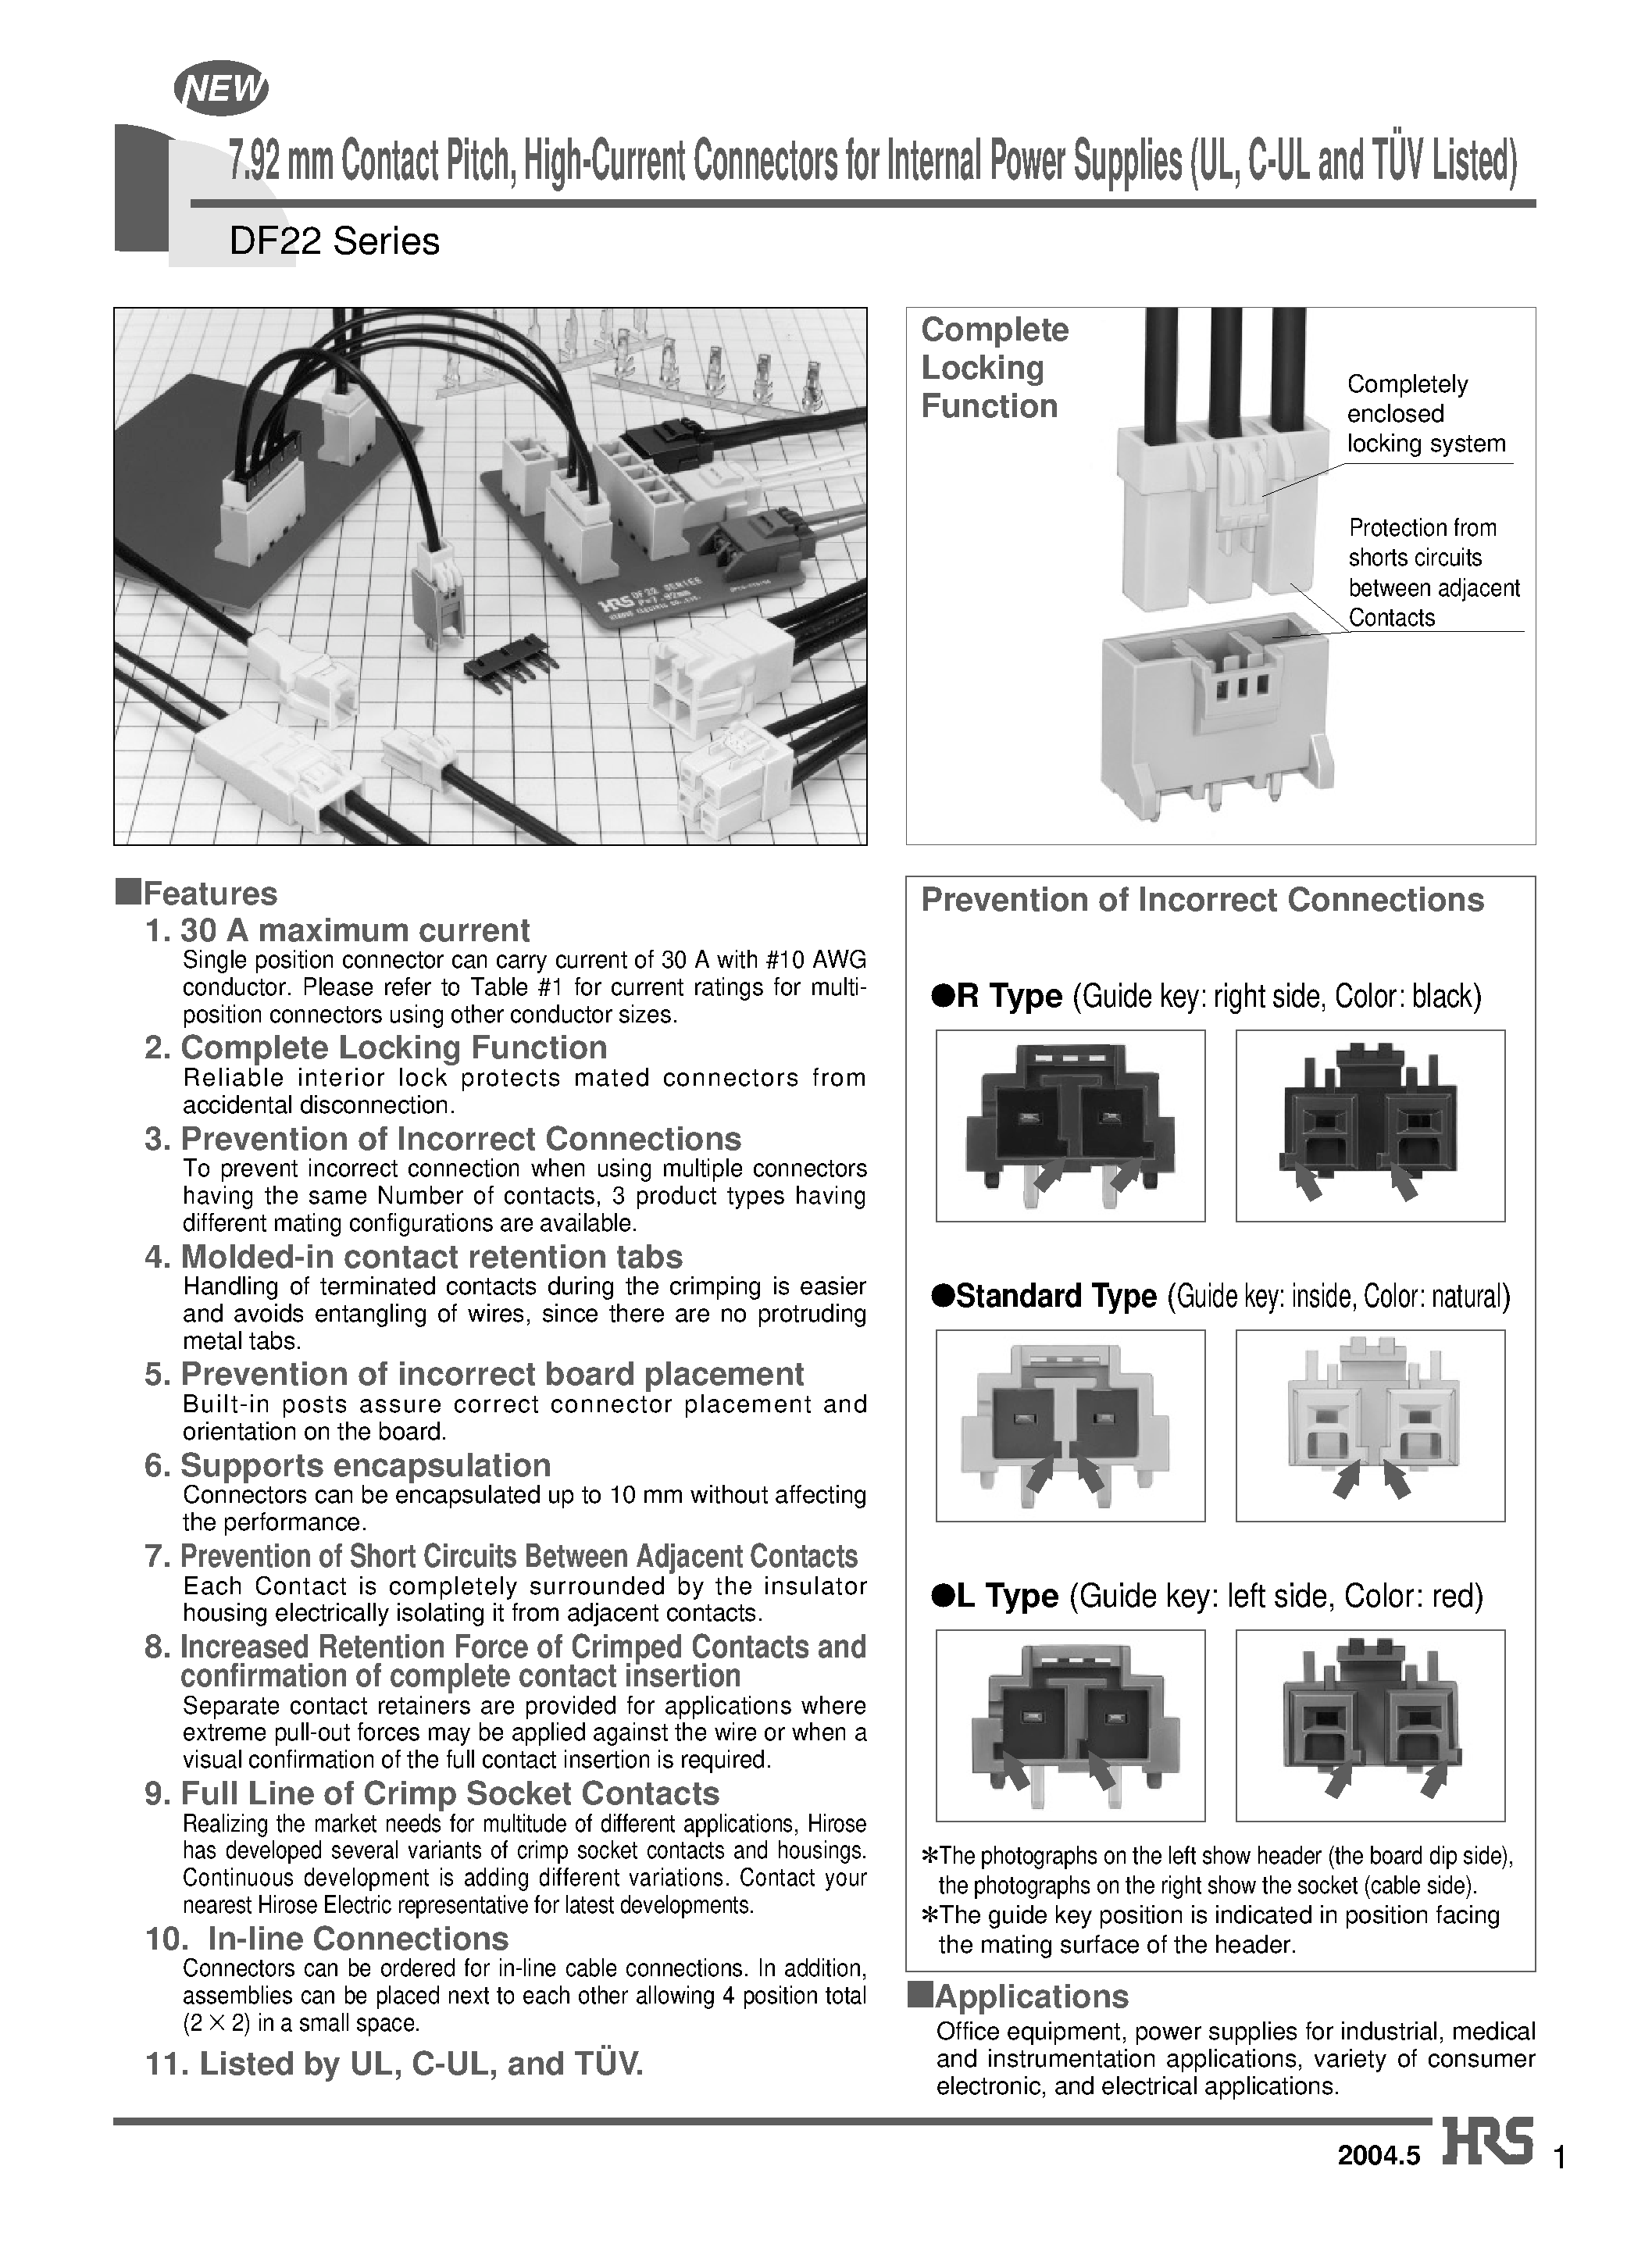 Datasheet DF22-4DEP-7.92DSA - 7.92 mm Contact Pitch/ High-Current Connectors for Internal Power Supplies (UL/ C-UL and TUV Listed) page 1